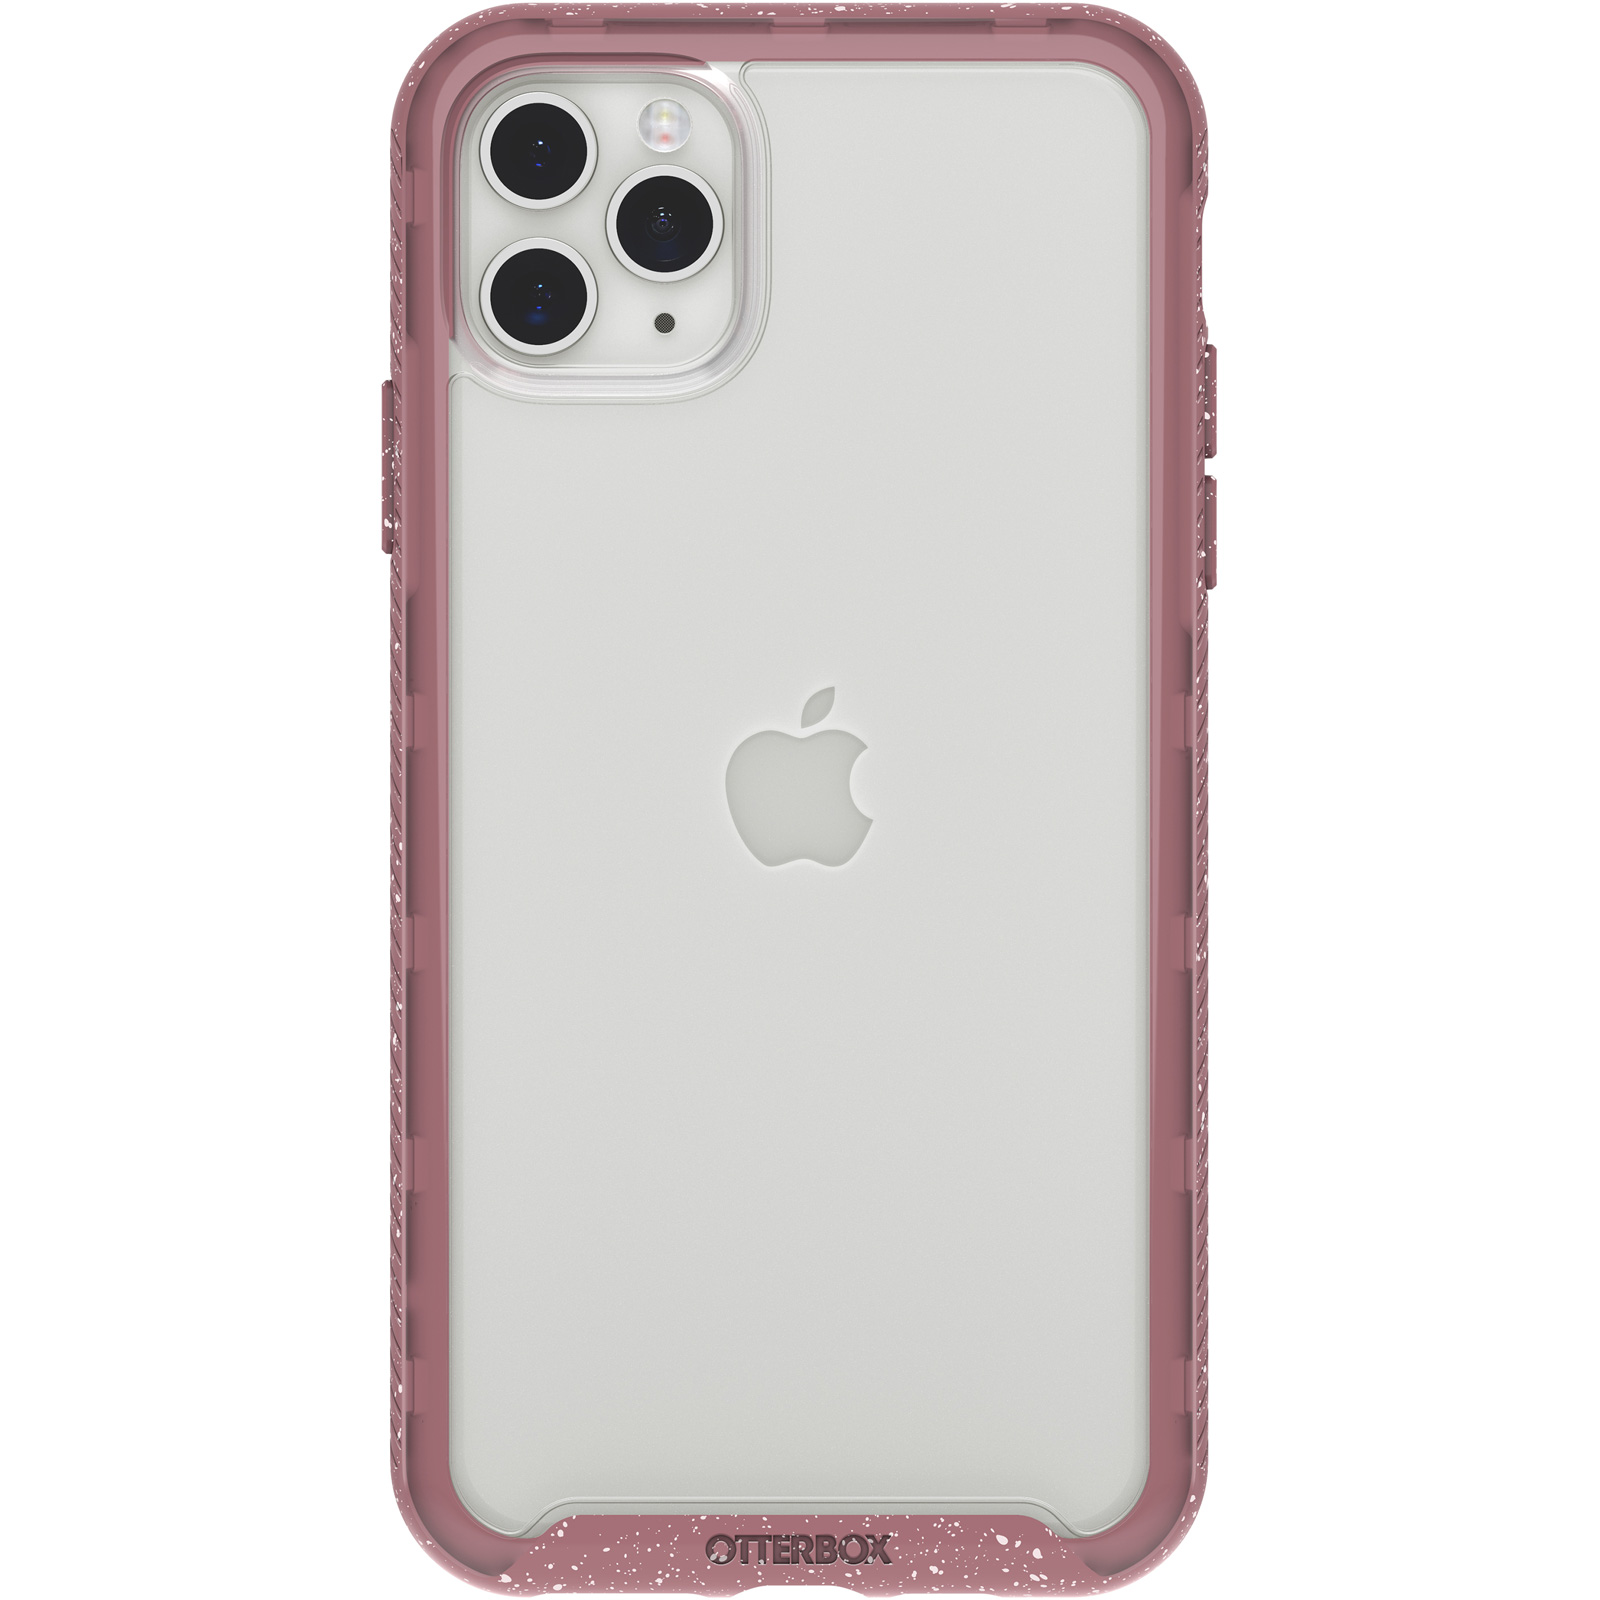 iPhone 11 Pro Max Traction Series Case Smash